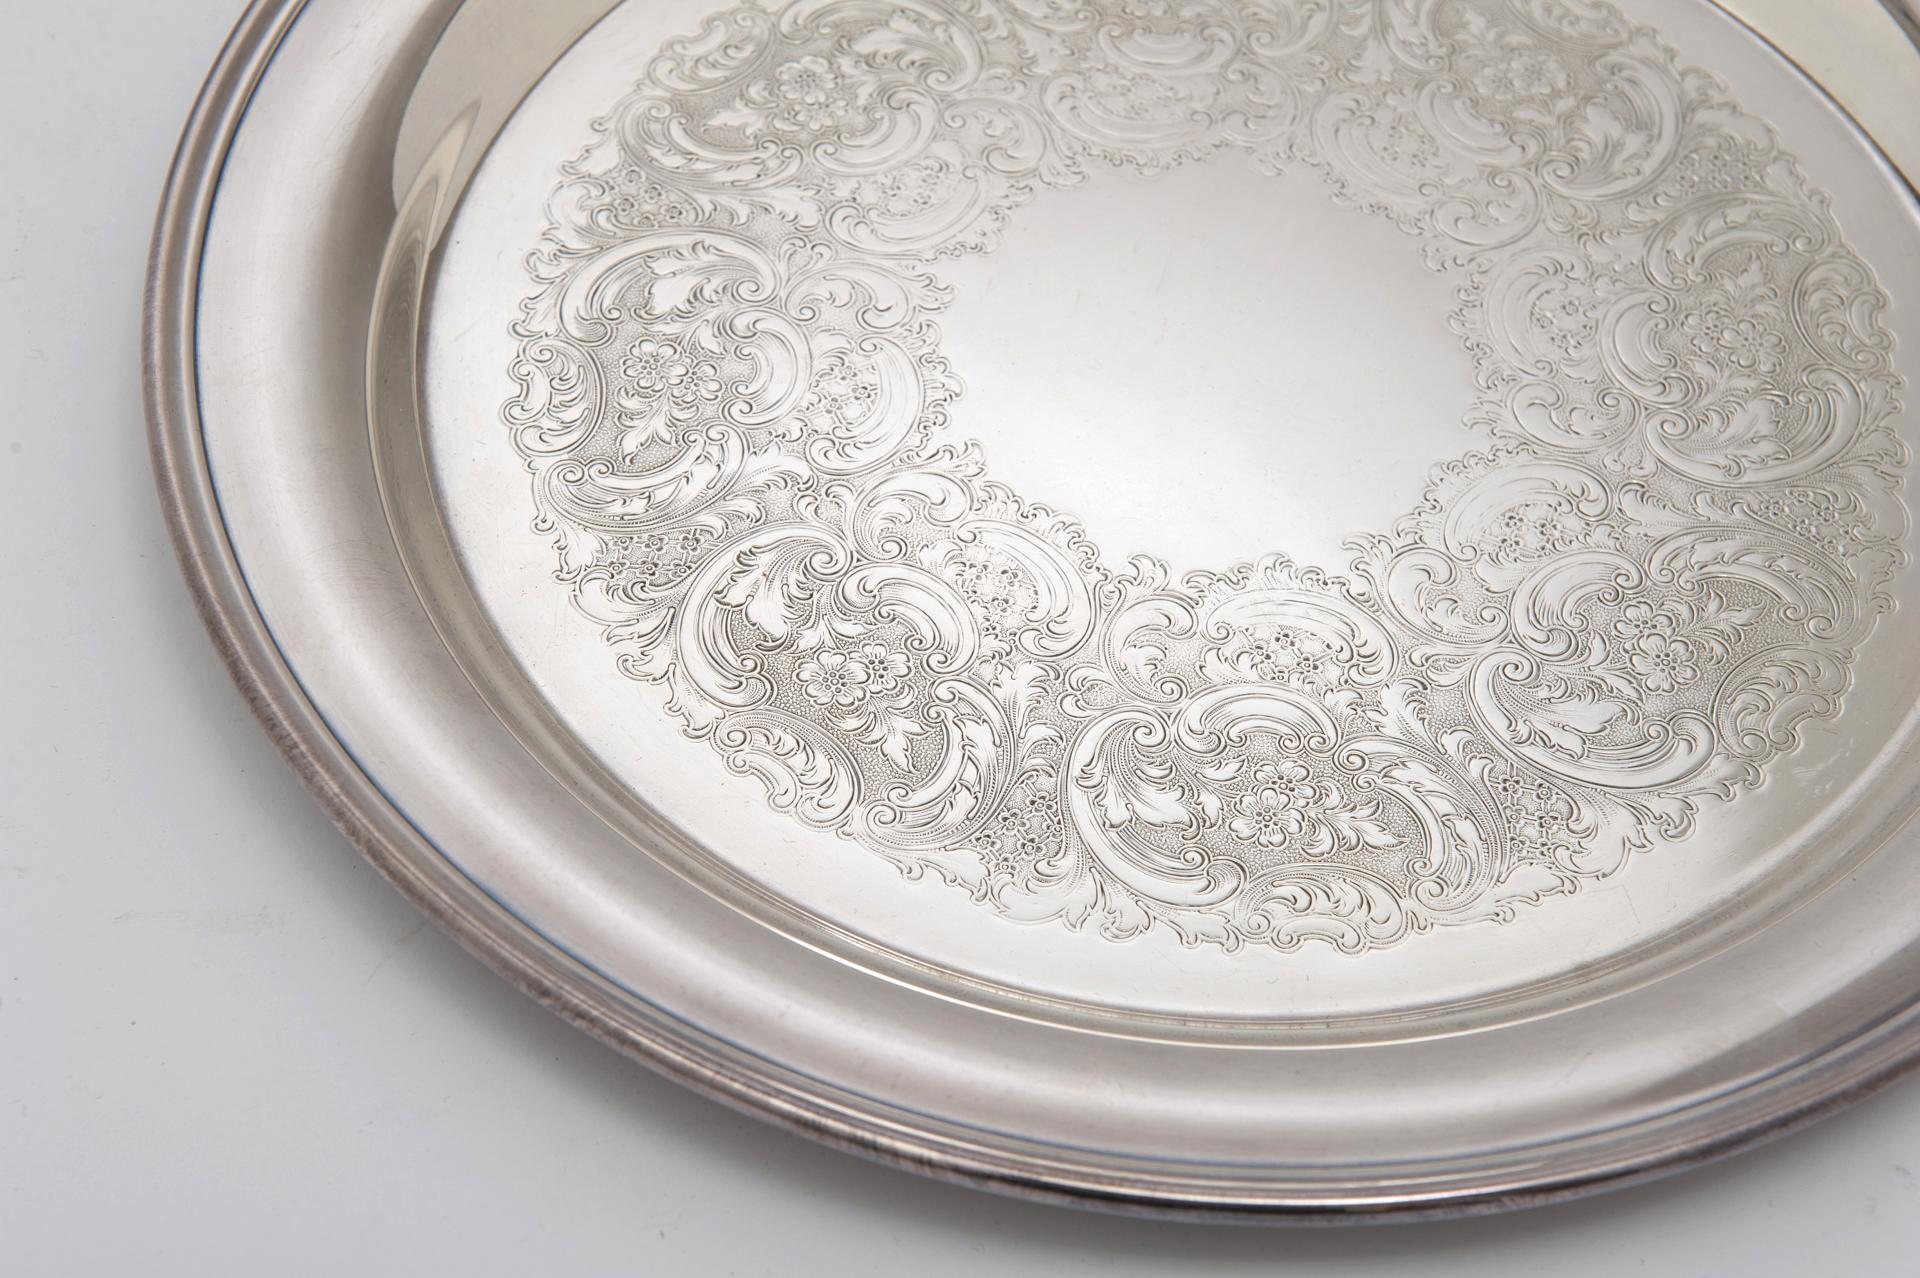 Elegant and simple : the style by Gorham! one of the most famous American silversmiths.